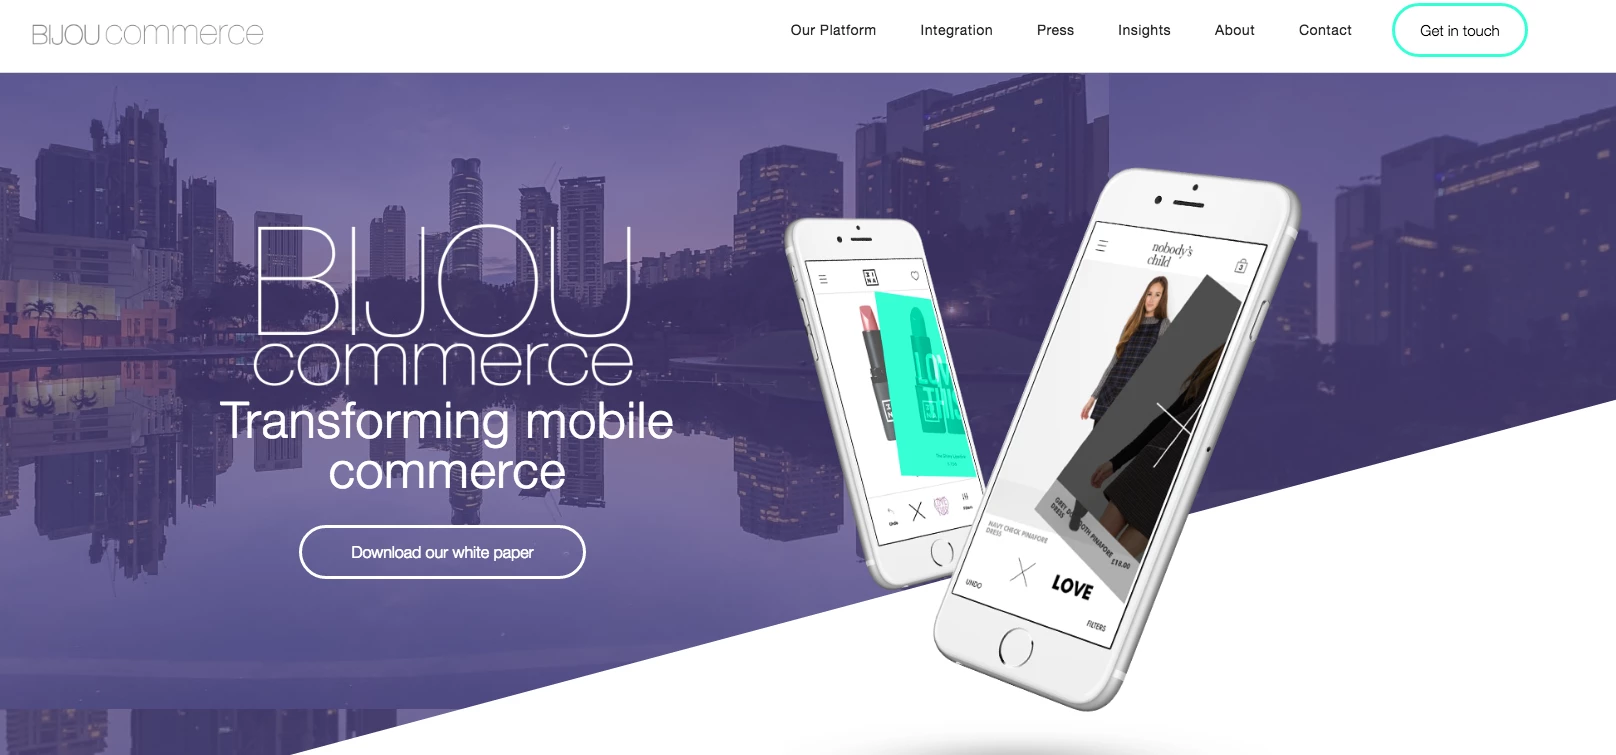 Bijou Commerce has launched its £800k crowdfunding campaign on Seedrs.